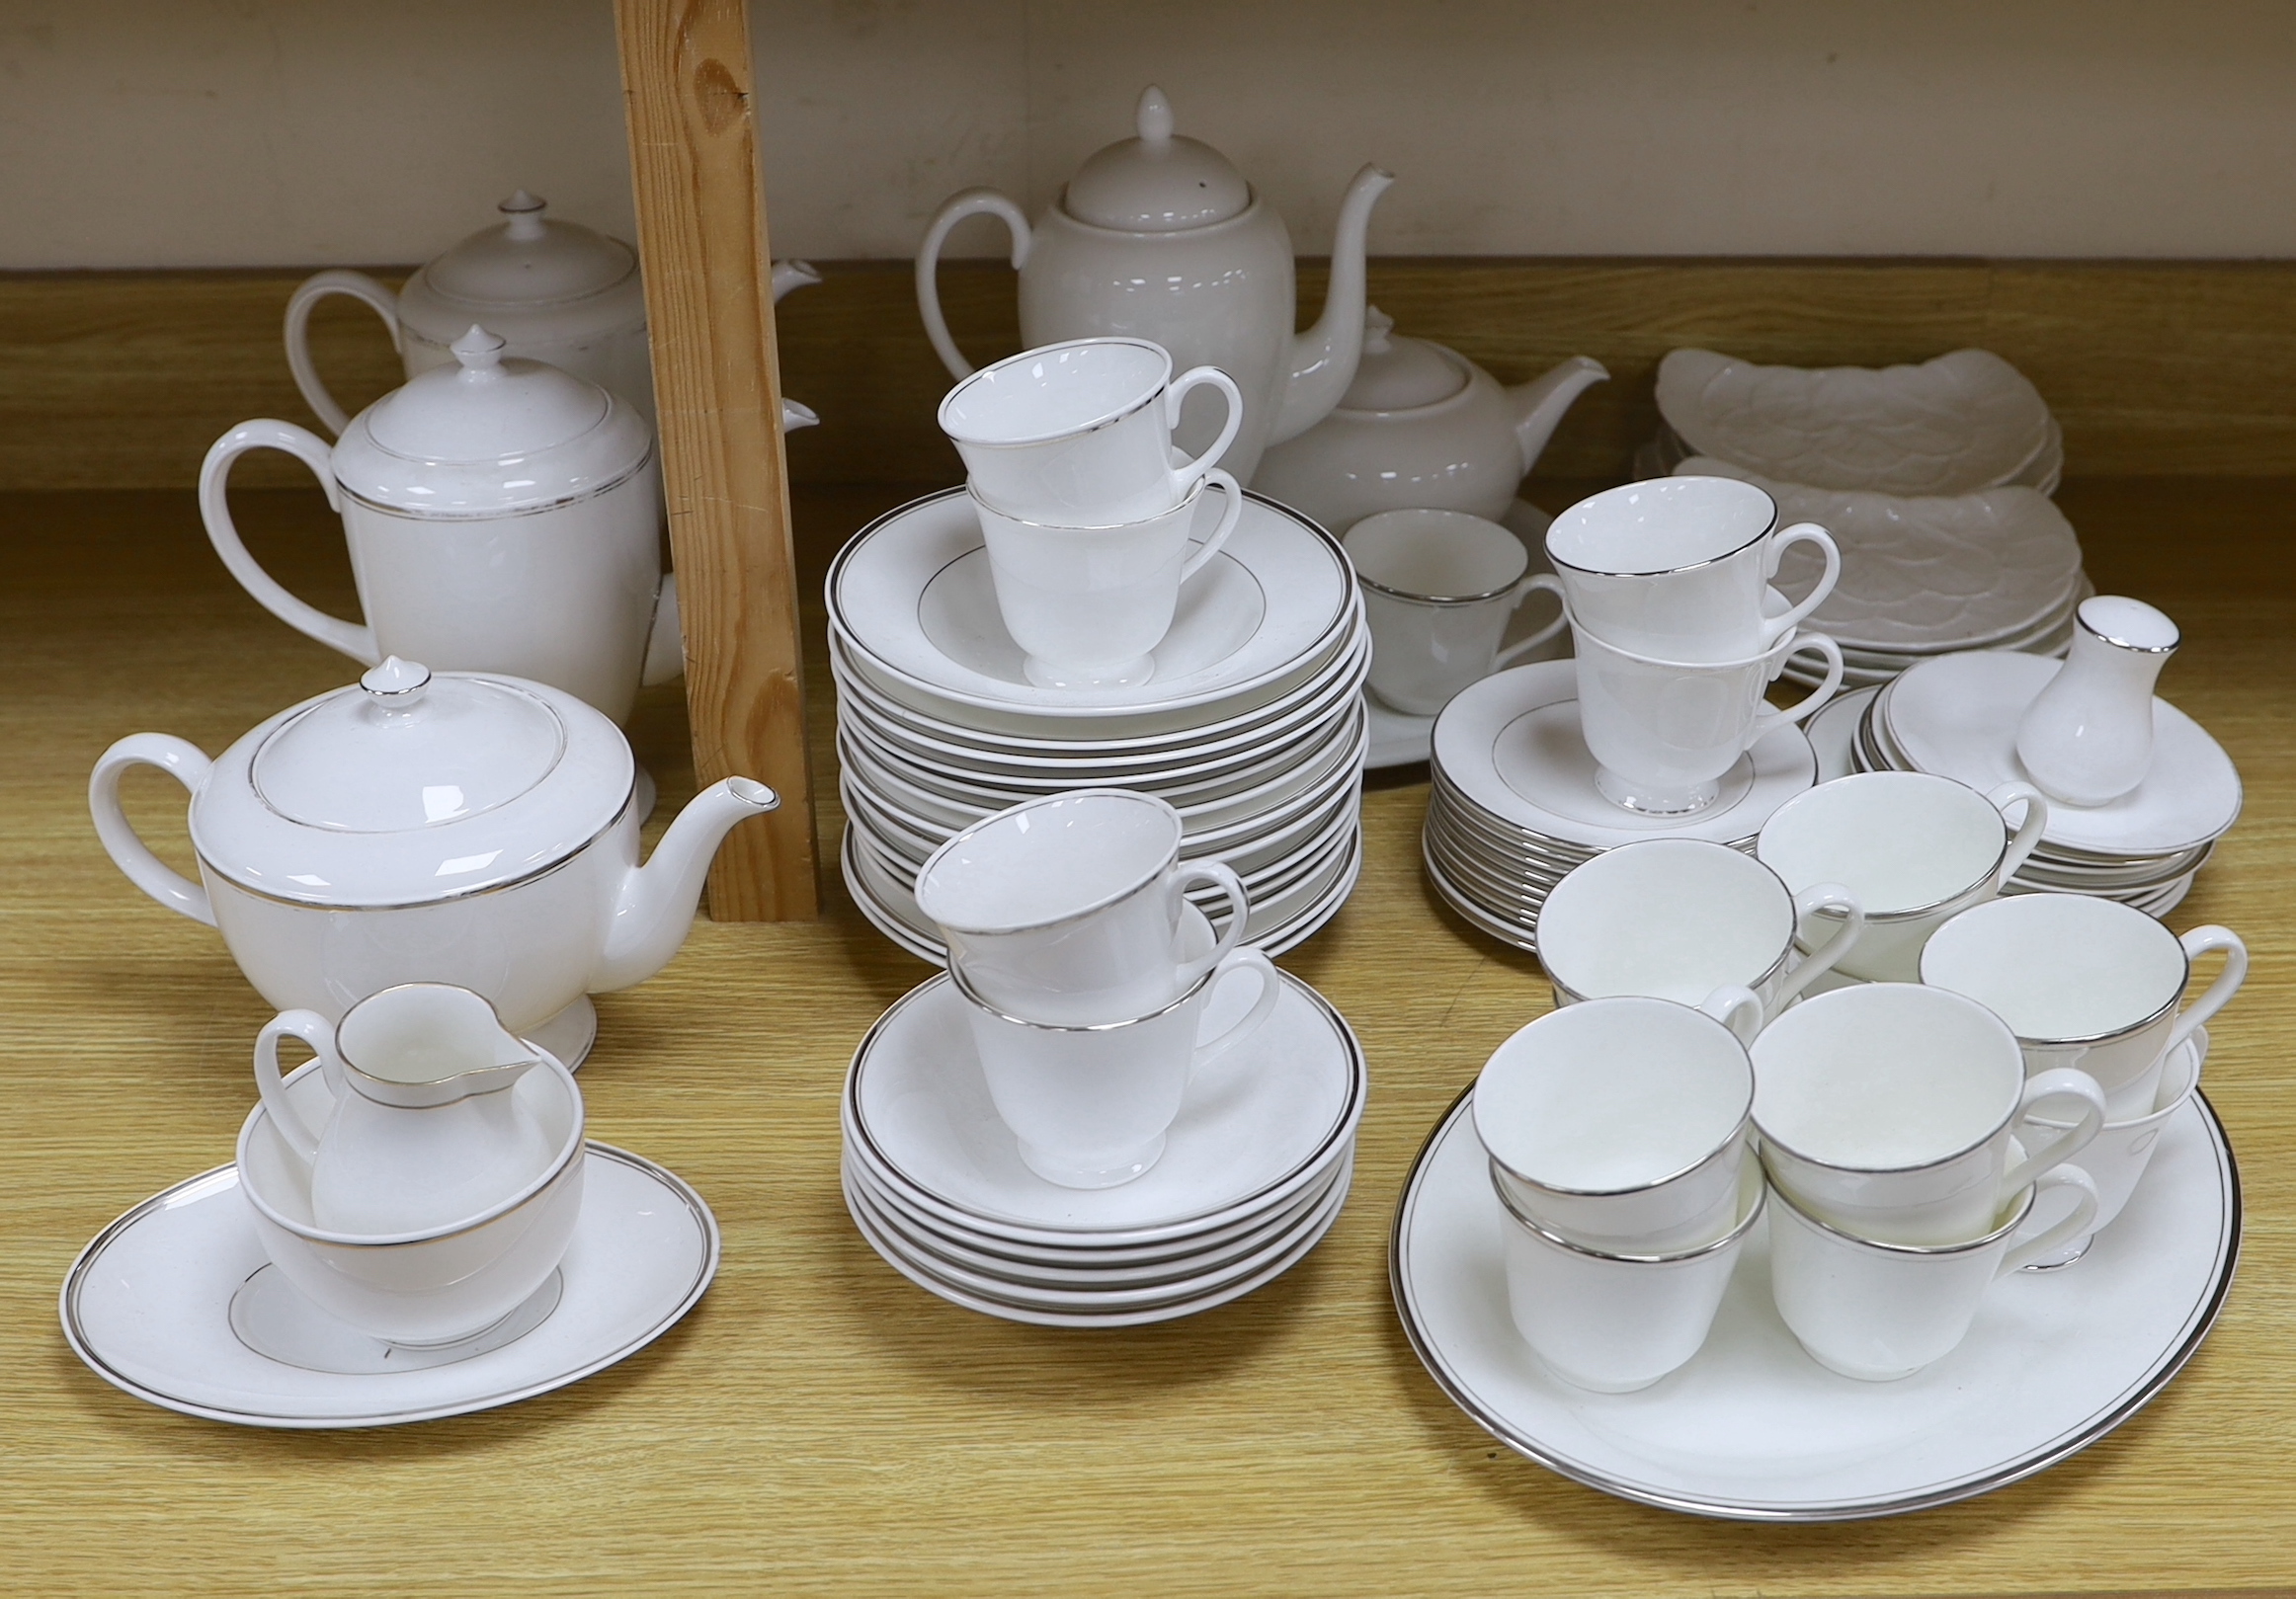 Miscellaneous collection of white bone china tea service (Royal Worcester, Royal Doulton and Wedgwood)